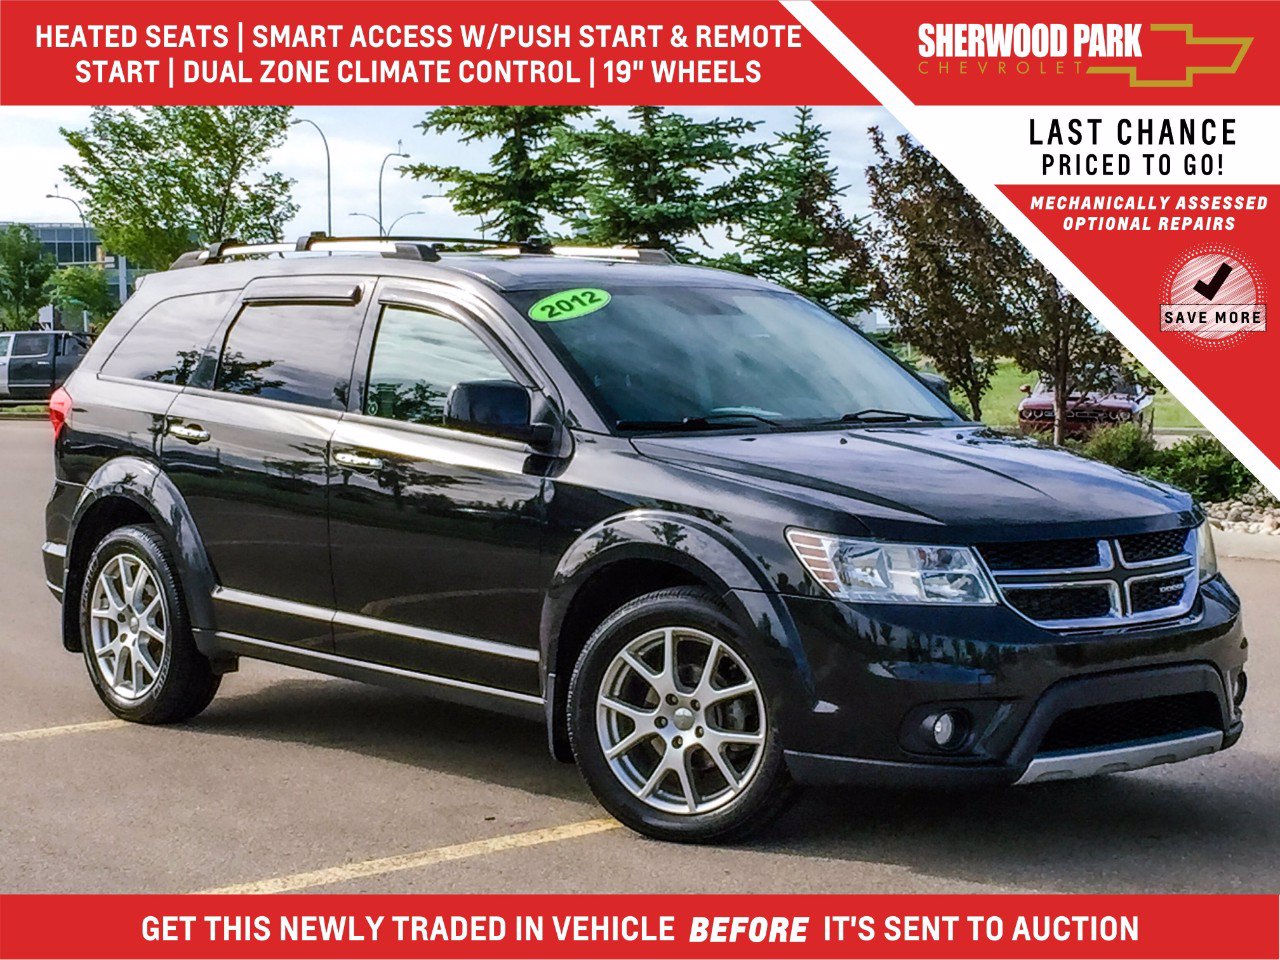 Pre Owned 2012 Dodge Journey Rt V6 Awd Awd Station Wagon